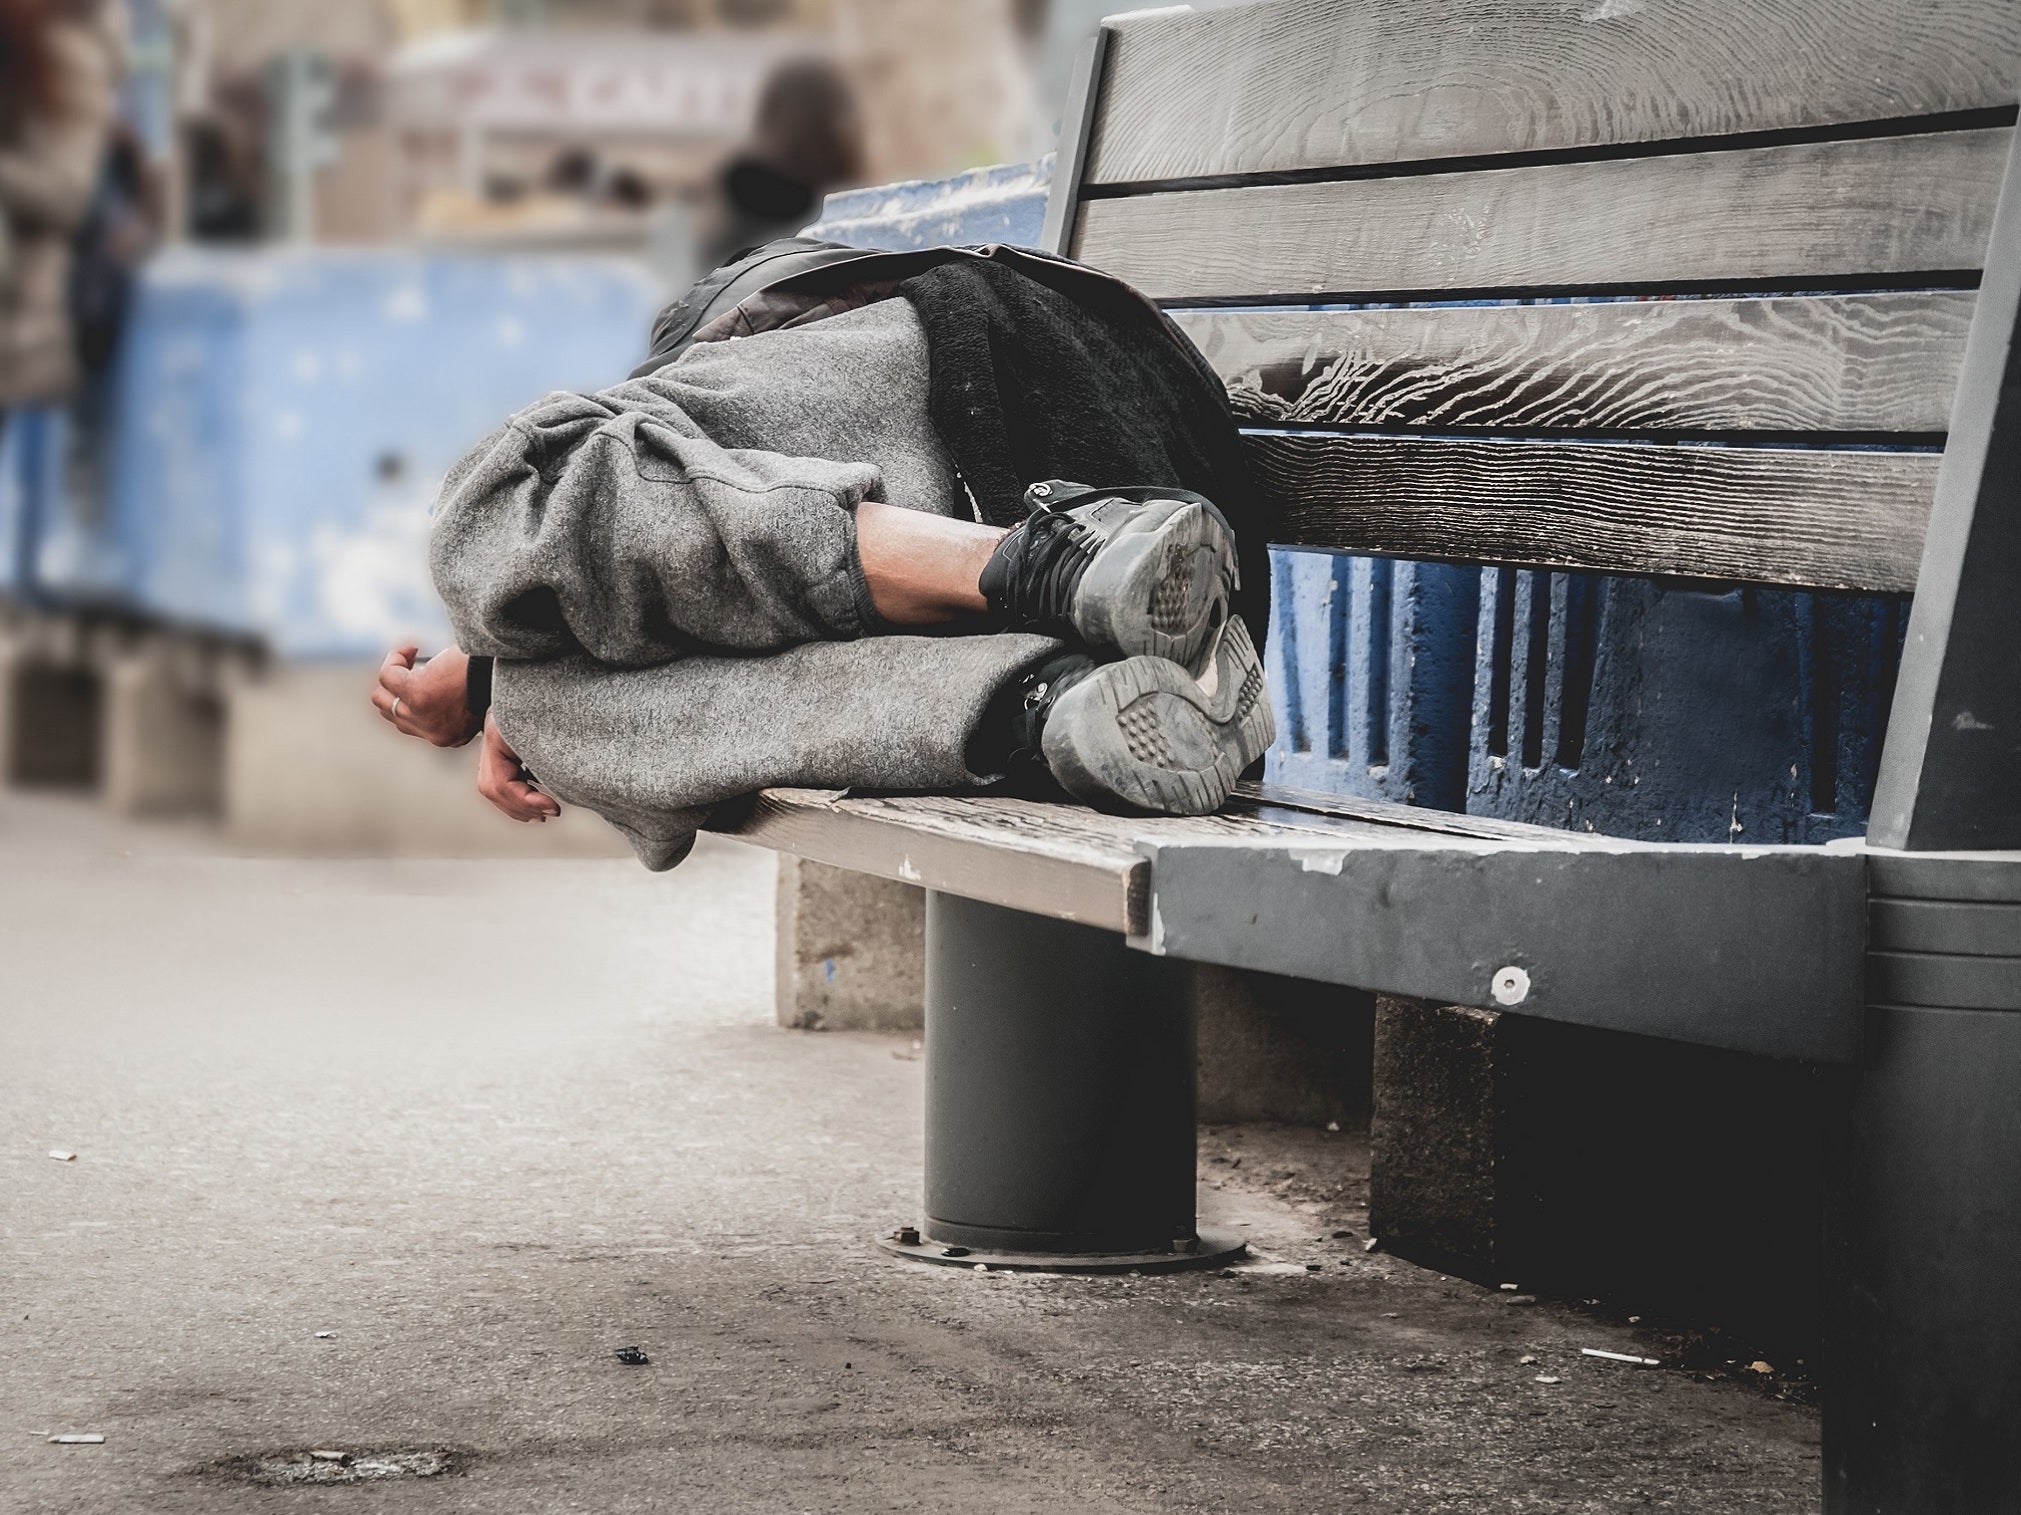 Council leaders say they haven’t been given adequate funding to meet the demands of the Homelessness Reduction Act, which the government lauded as most ambitious legislation in decades